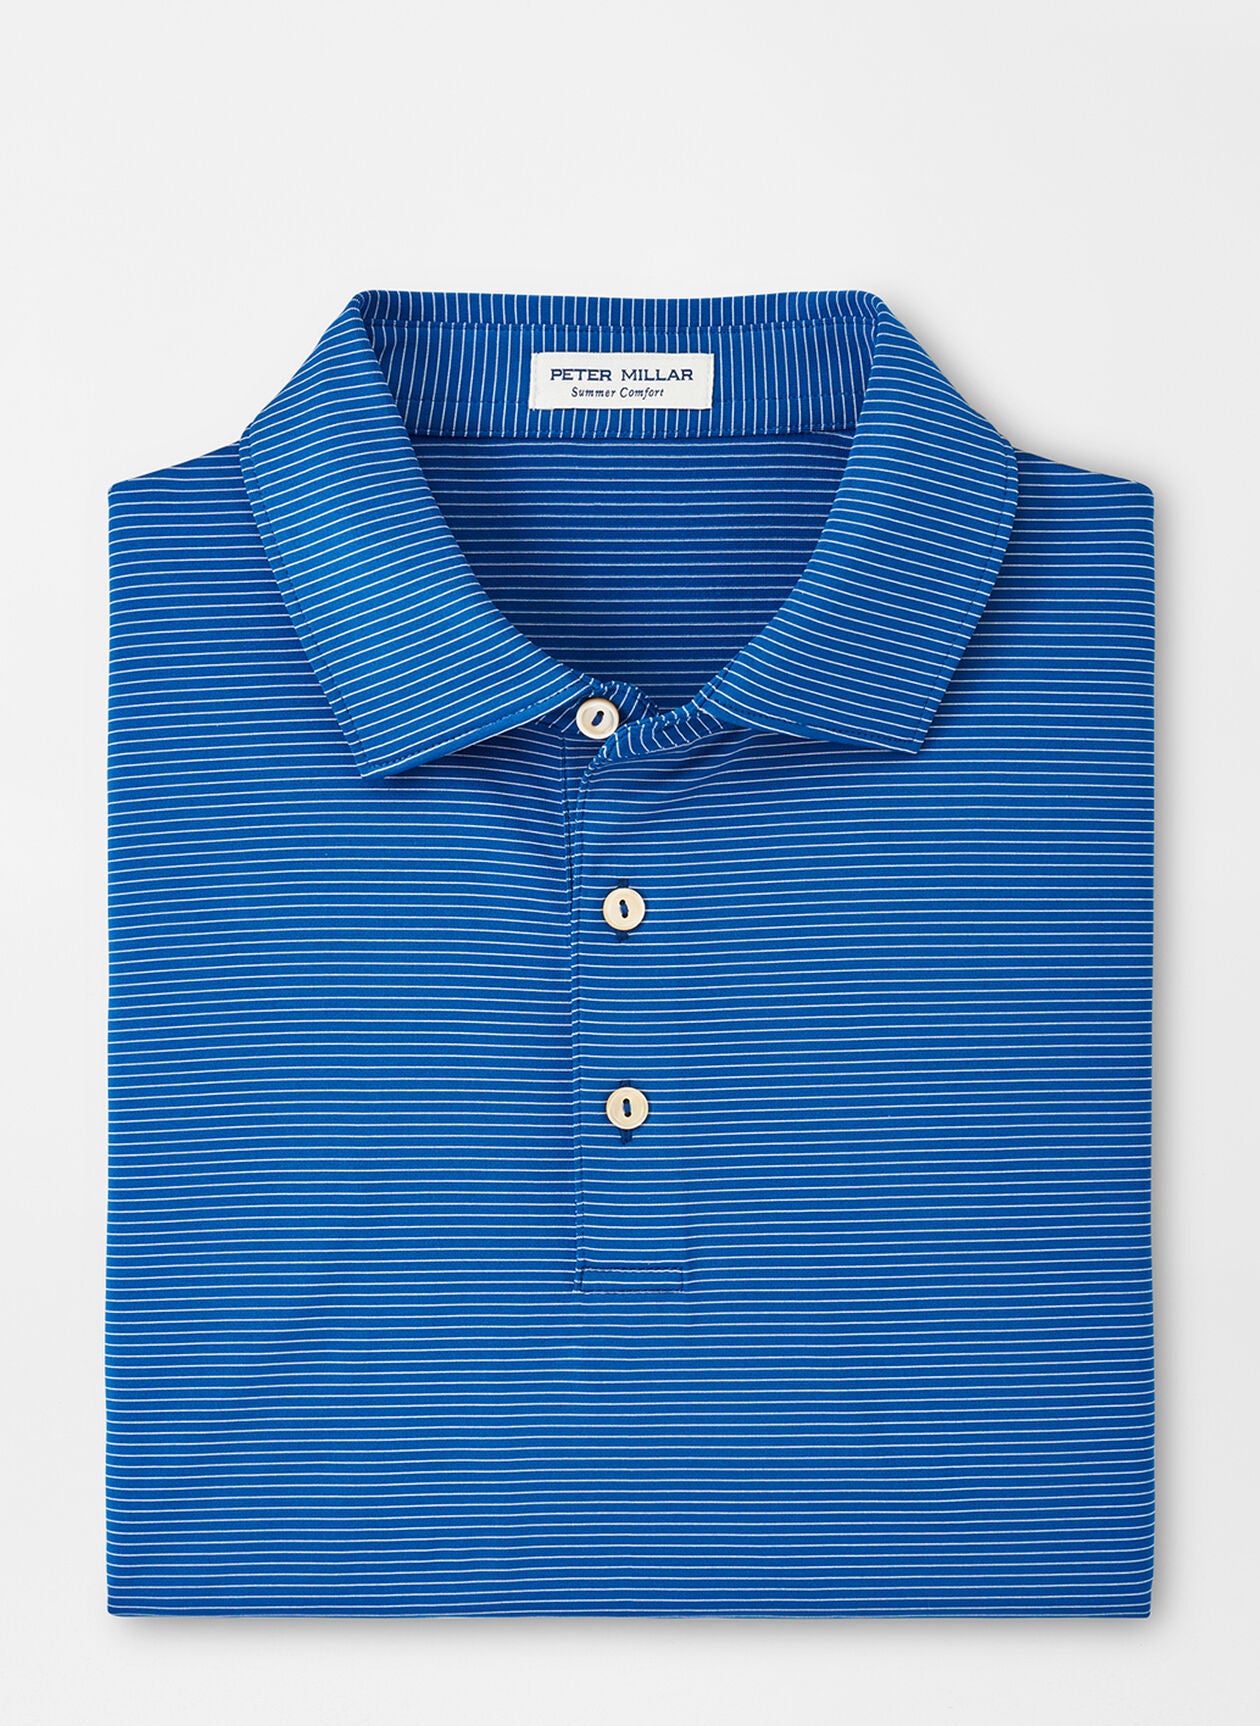 Halford Performance Jersey Polo- Starboard Blue